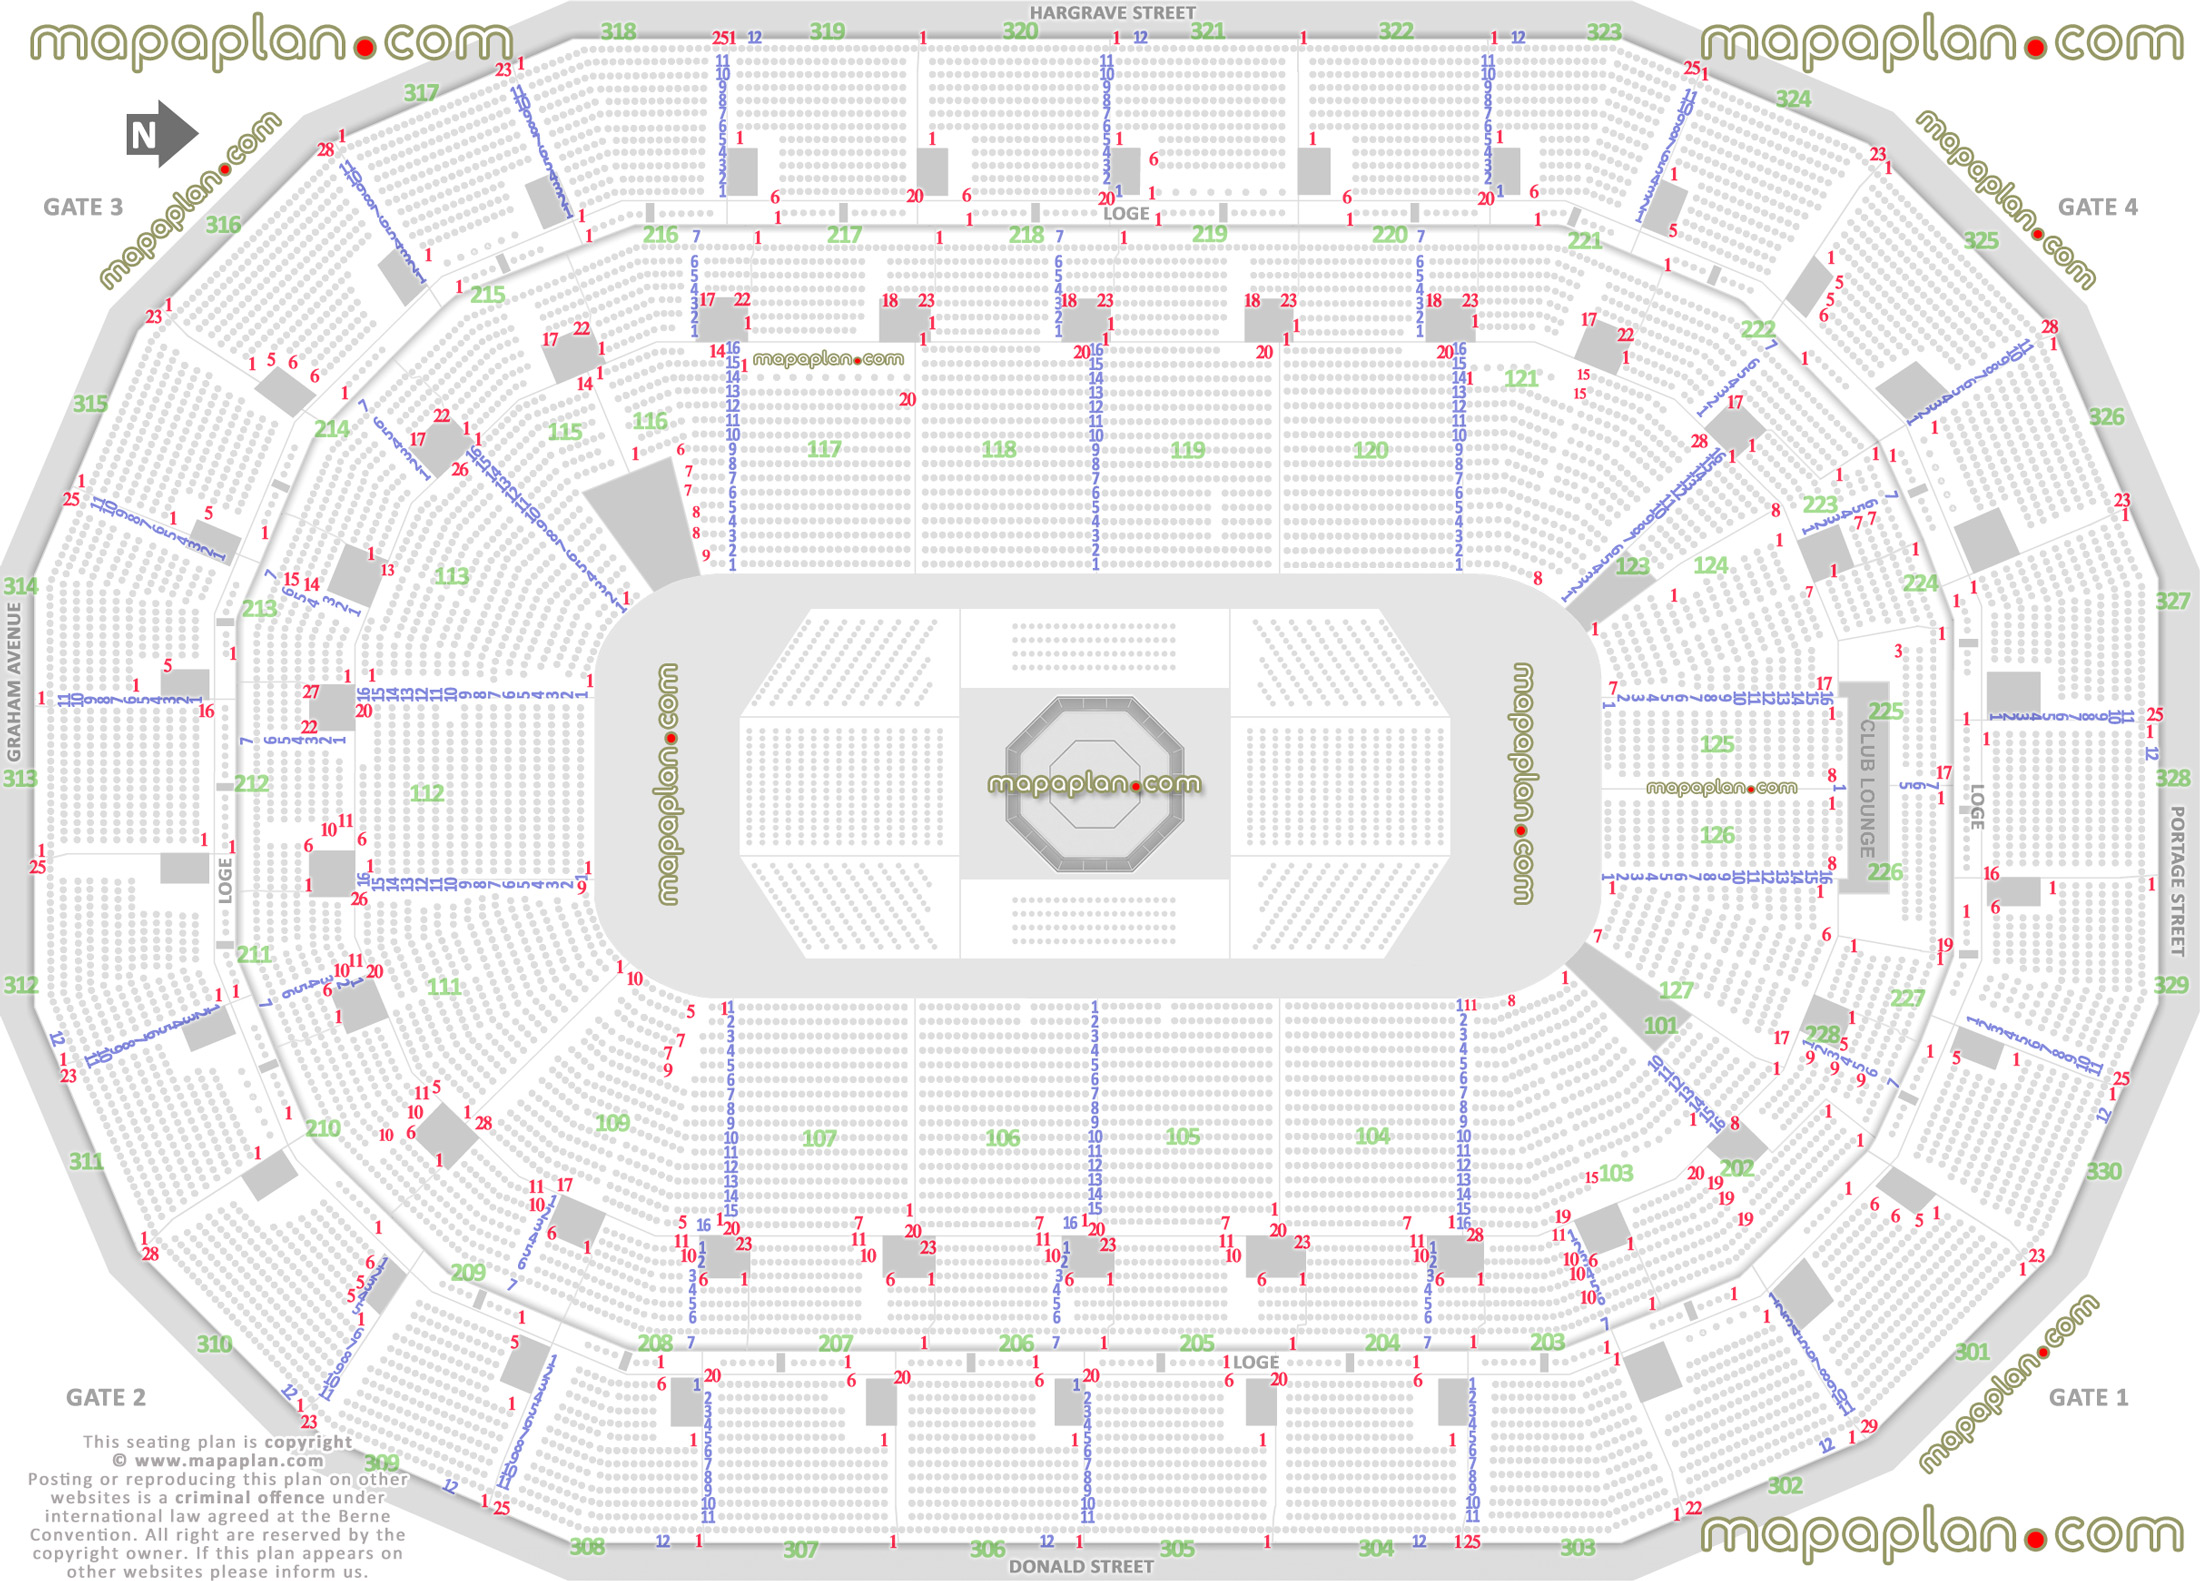 ufc mma fights winnipeg manitoba canada detailed seating capacity arrangement arena row numbers layout arena main entrance gate exits map west east south north detailed fully seated chart setup standing room only sro area wheelchair disabled handicap accessible seats plan Winnipeg MTS Centre seating chart